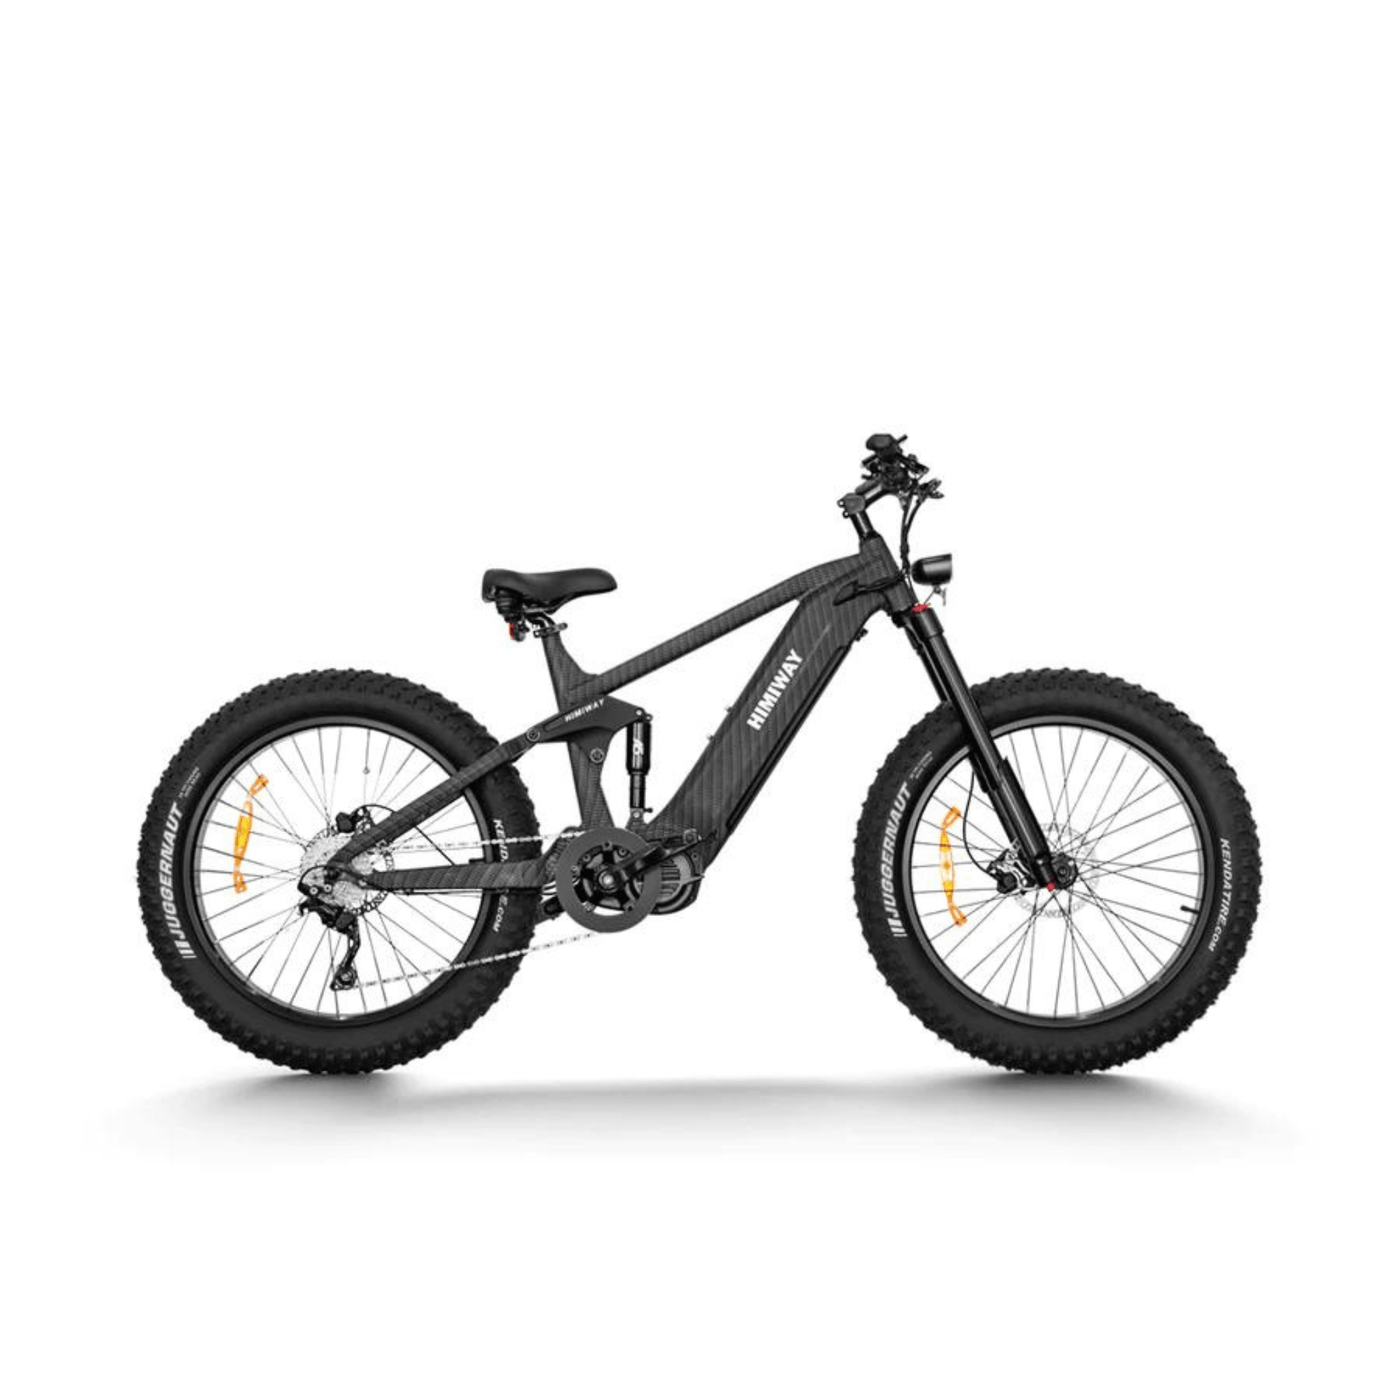 Himiway Cobra Pro 1000W Fat Tire Electric Bike - Rider Cycles 